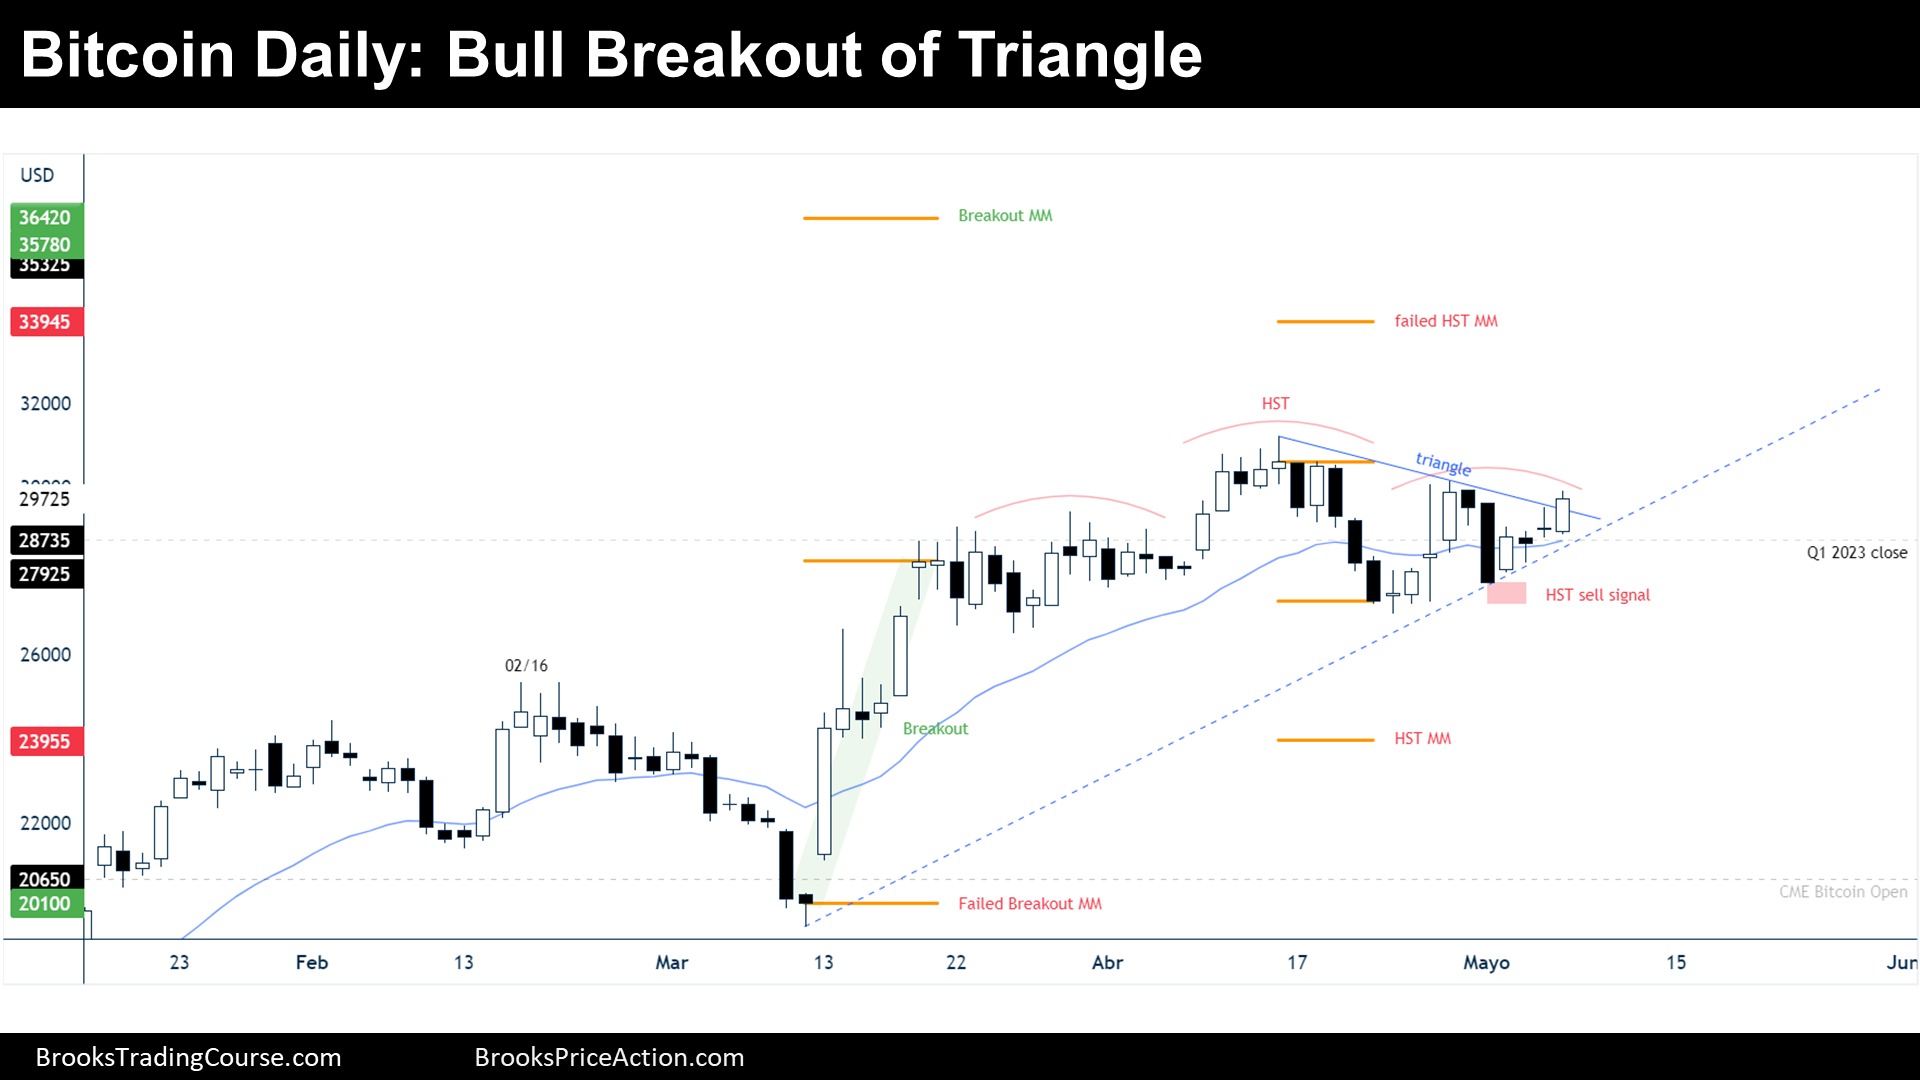 Bitcoin Daily Bull Breakout of Triangle